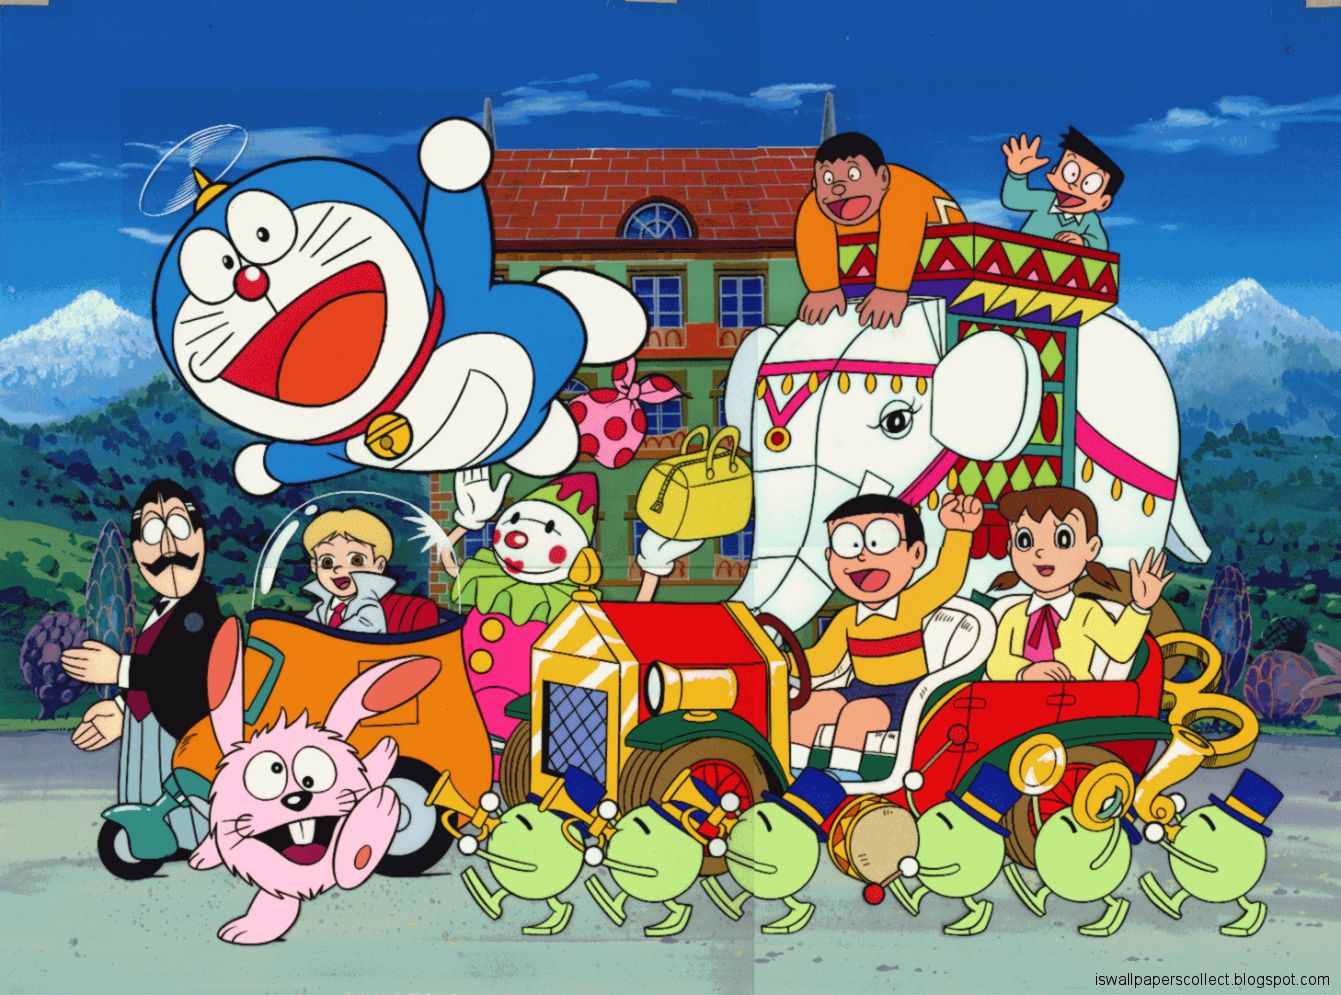 Animation Doraemon Wallpaper For Android Free Download Wallpapers Collection